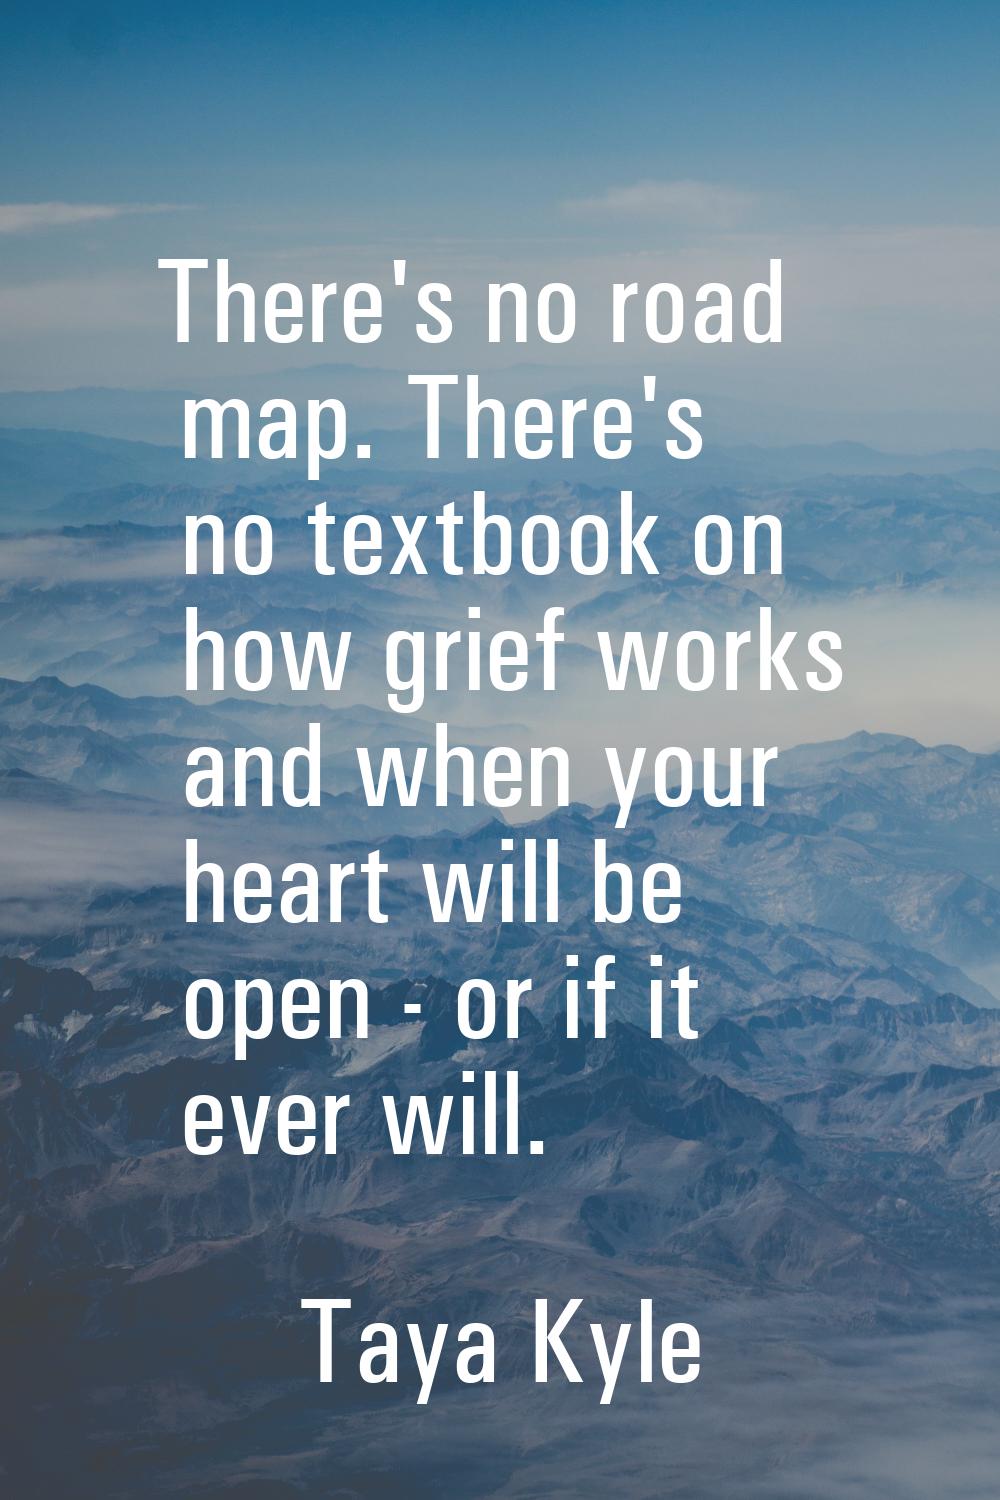 There's no road map. There's no textbook on how grief works and when your heart will be open - or i